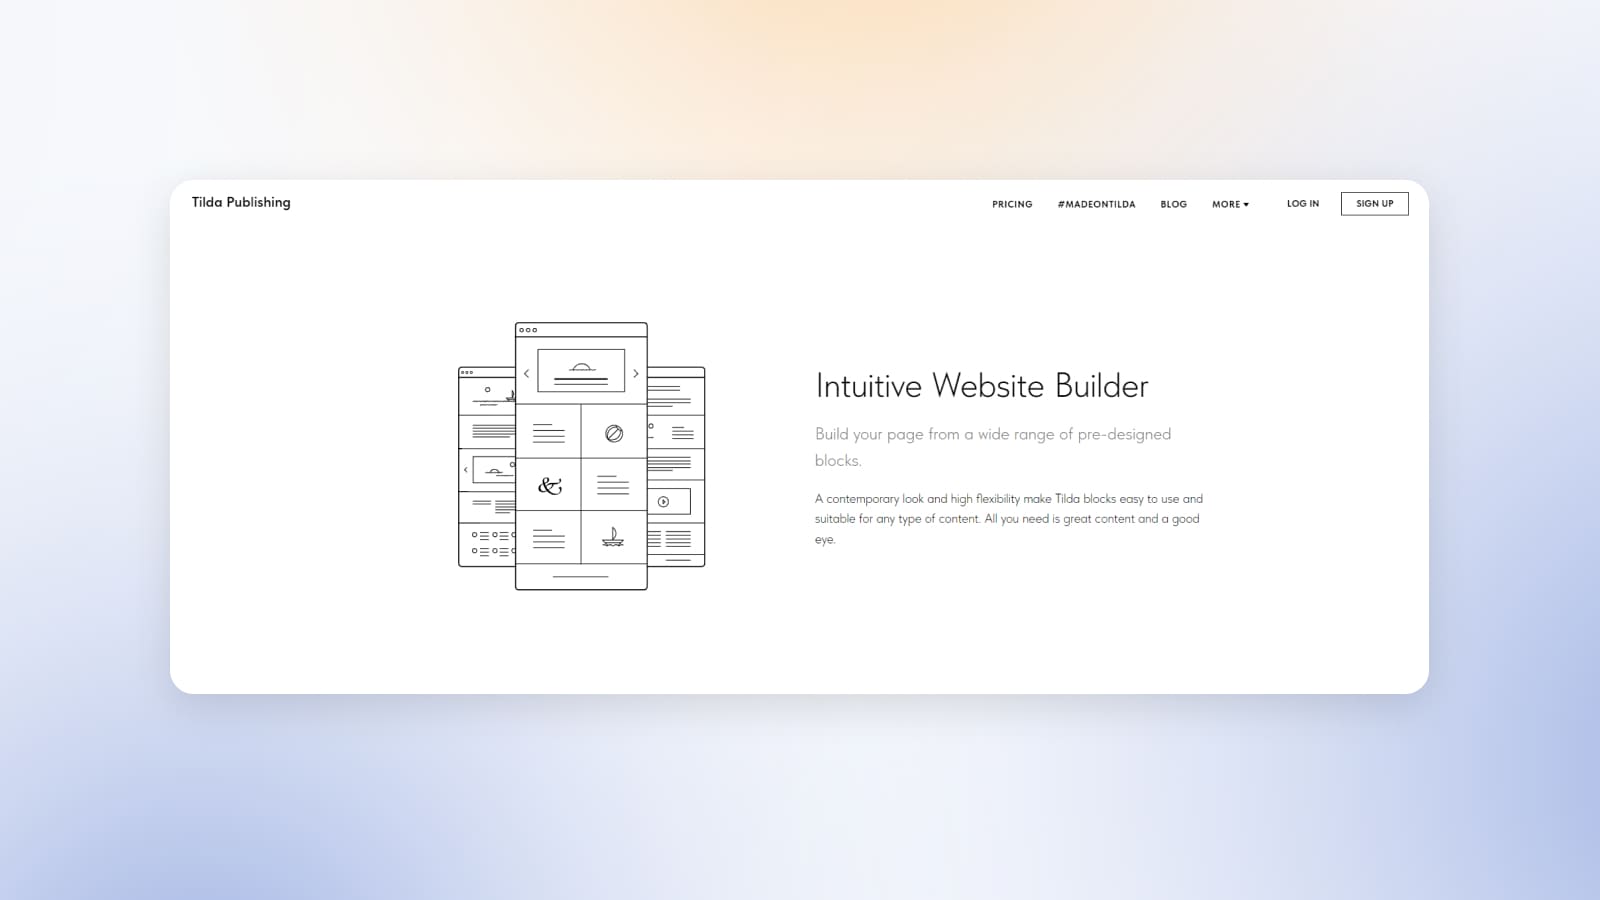 Tilda is a website builder designed for users, among others, who have no programming skills.